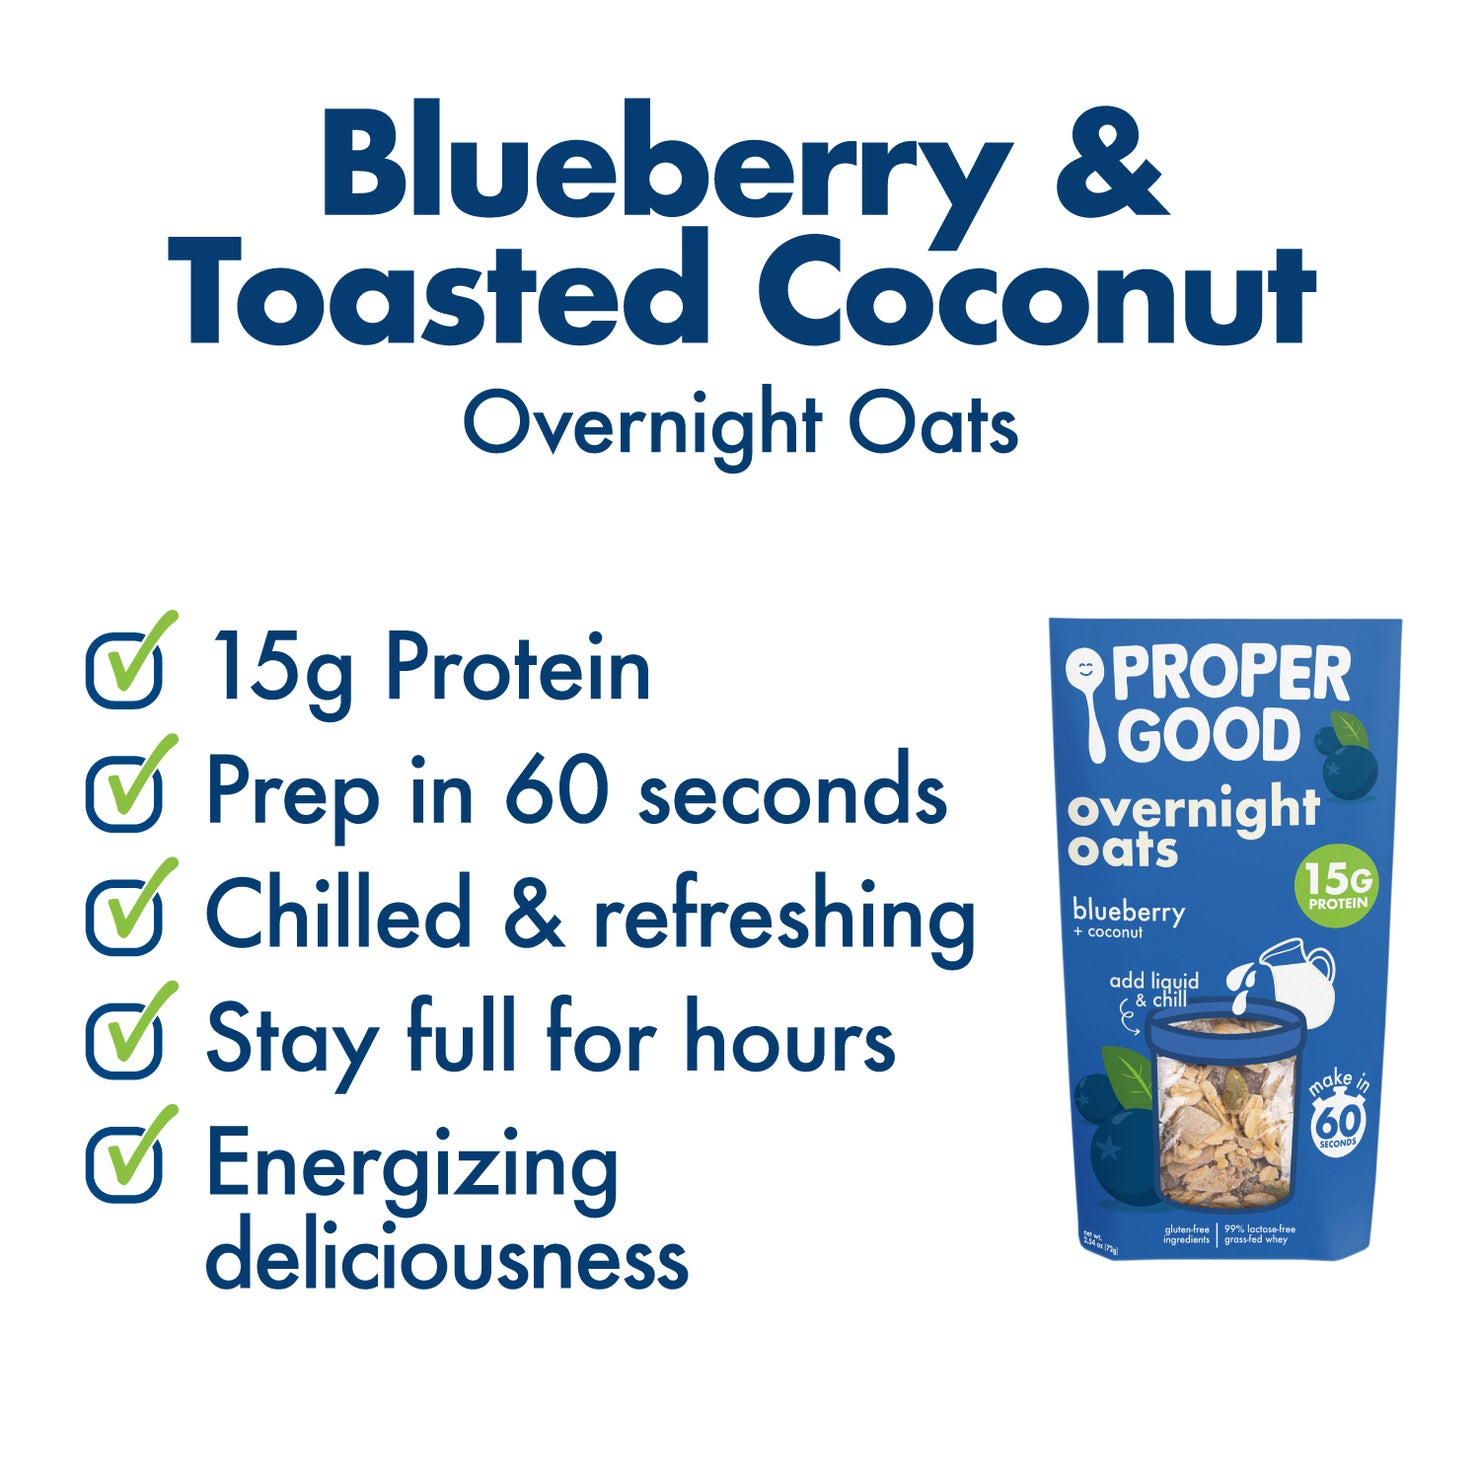 Blueberry & Toasted Coconut Protein Overnight Oats Benefits - Eat Proper Good